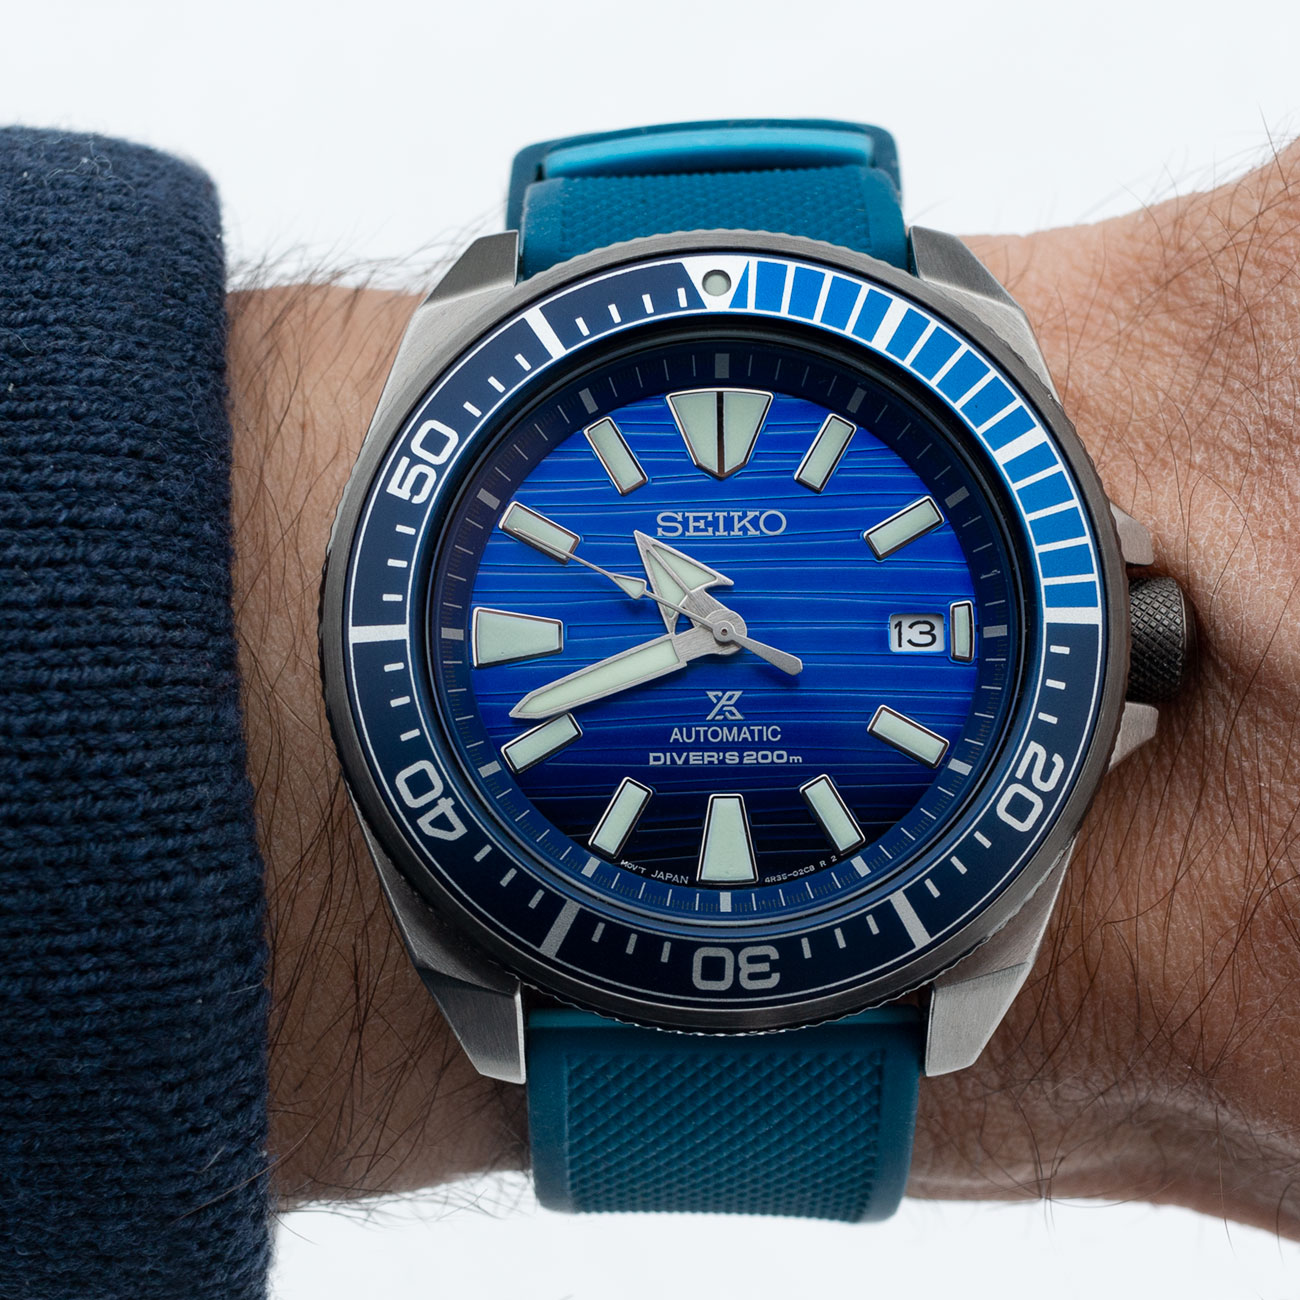 Seiko Prospex SRPC93 'Save The Ocean' Samurai Dive Watch Review on the wrist